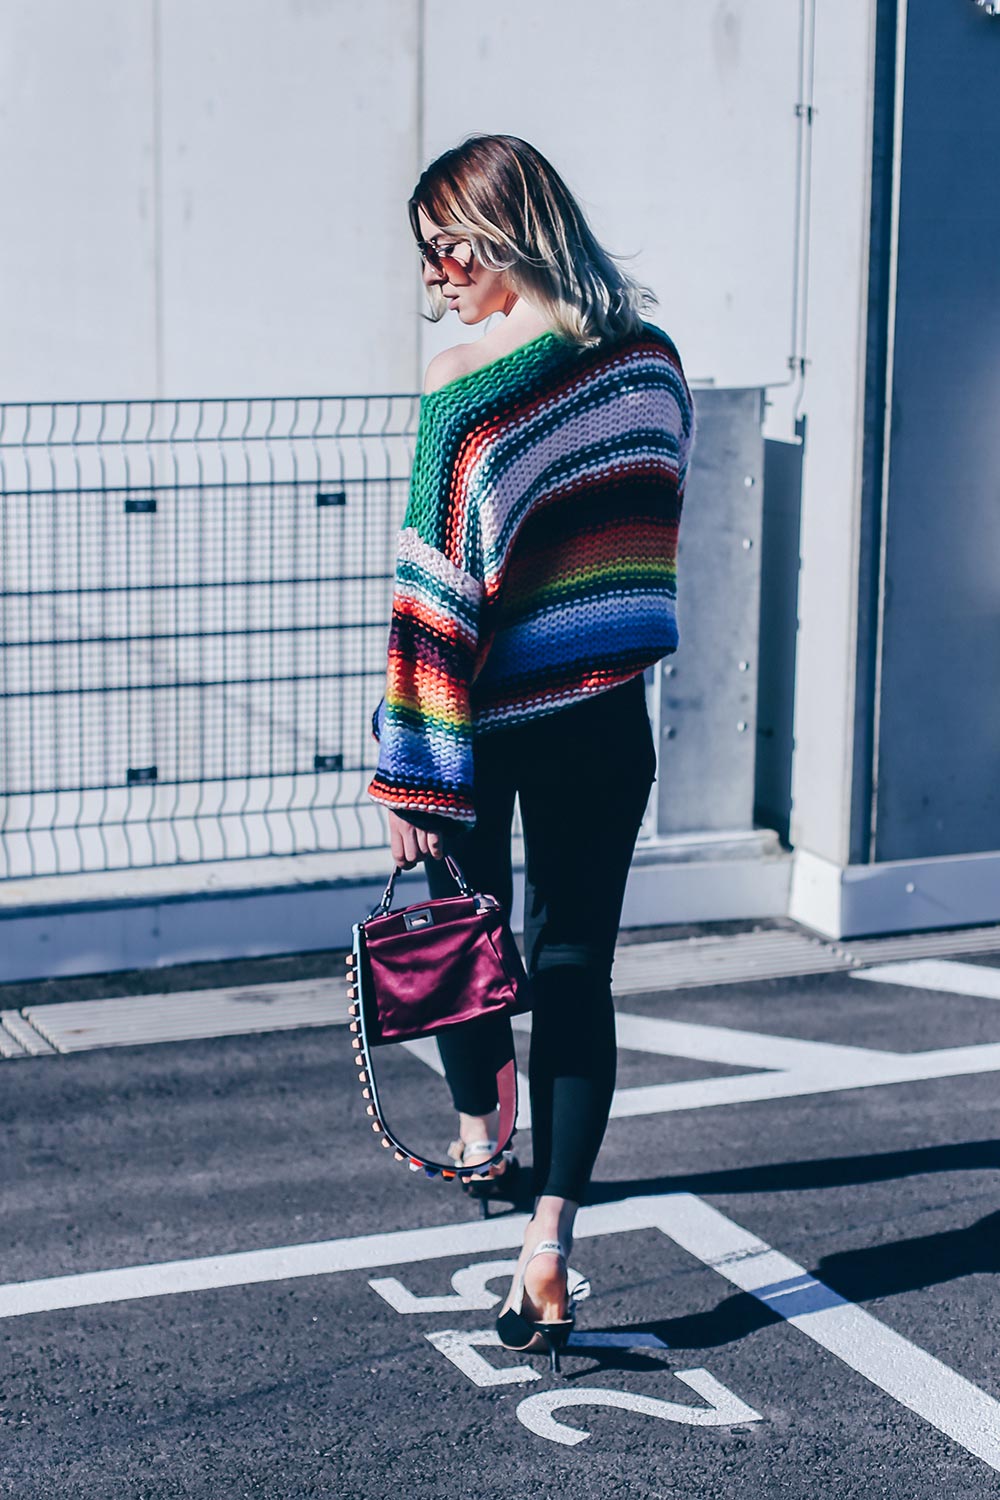 How to wear Bold Stripes, Outfit Ideen, Trendreport, Modetrends 2017, bunte Streifen kombinieren, Style Blog, Fashion Blog, Modeblog, Outfit Blog, www.whoismocca.com